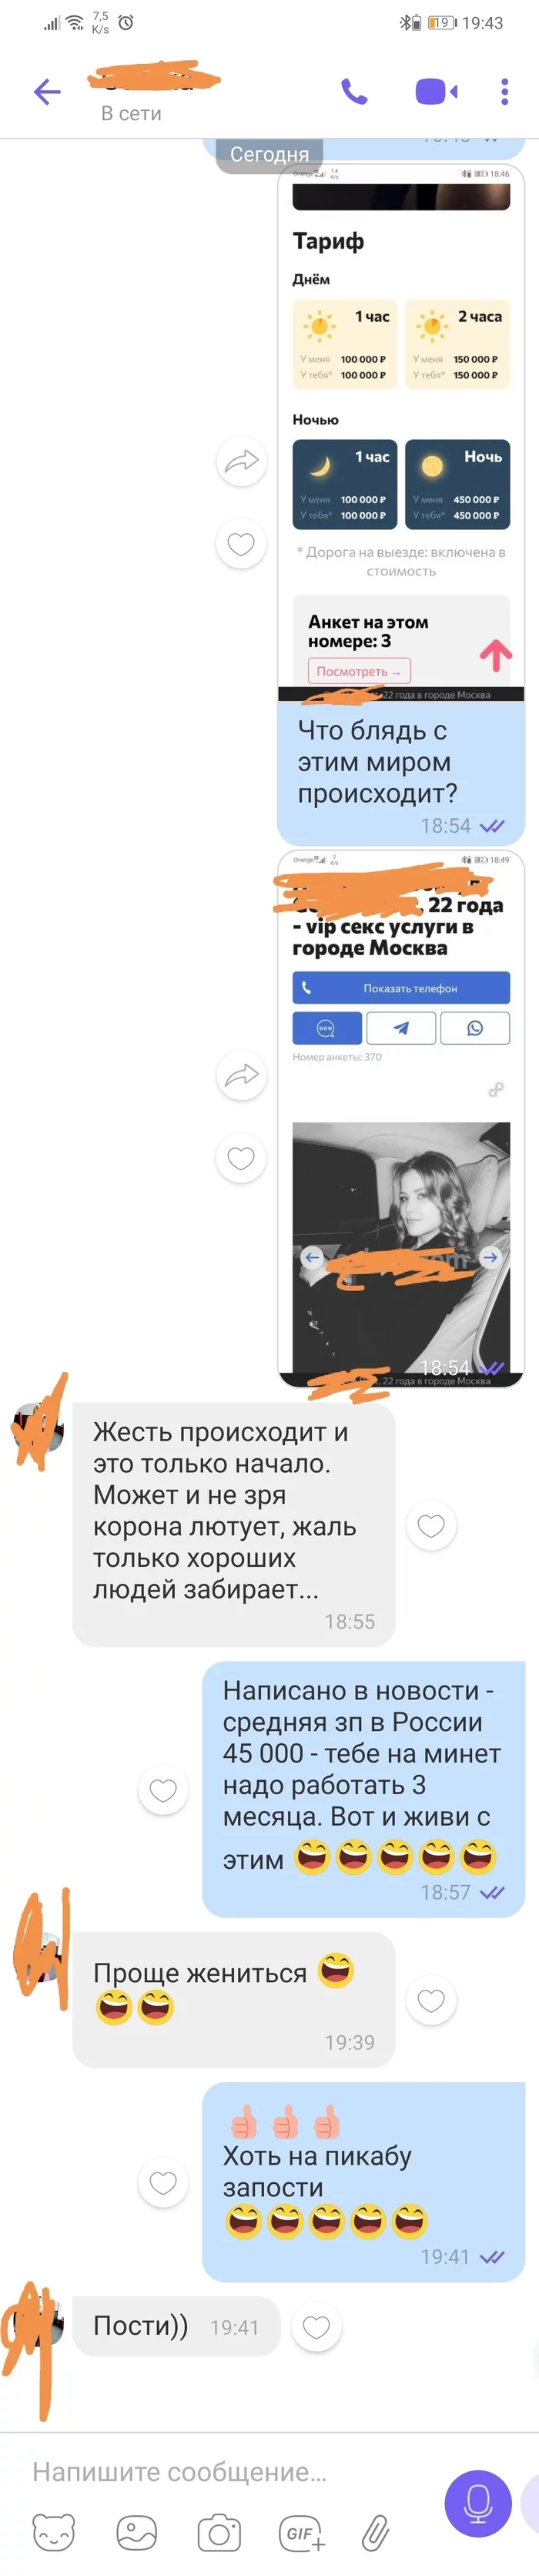 Not a special post for Peekaboo, or what's wrong with this world? - My, Screenshot, Prostitution, Peekaboo, Wife, Salary, Low salary, Russia, Longpost